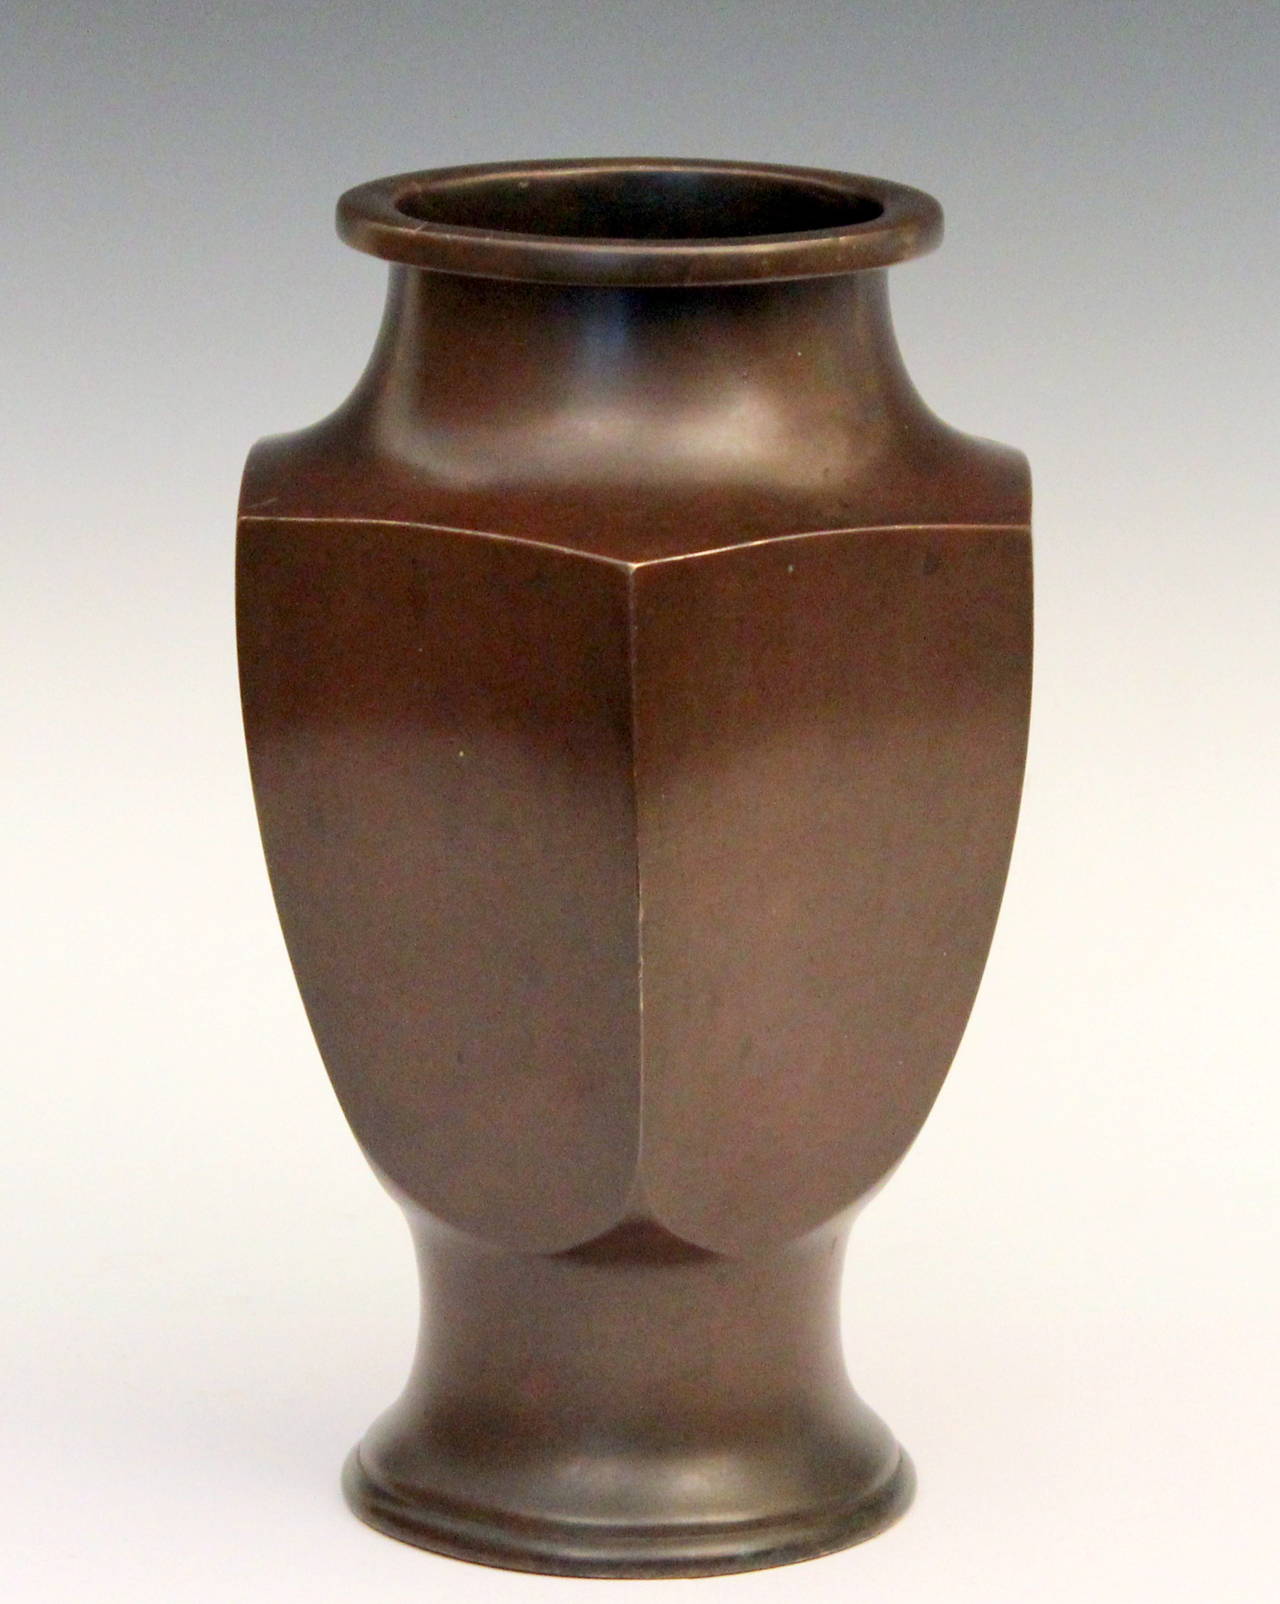 Japanese bronze vase in faceted hexagonal form with warm reddish brown patina, circa 1930s. Measures: 12" high, 7" across facets, 8" across corners. 9+ pounds. Good vintage condition, a few bumps and a light ripple in one side, as